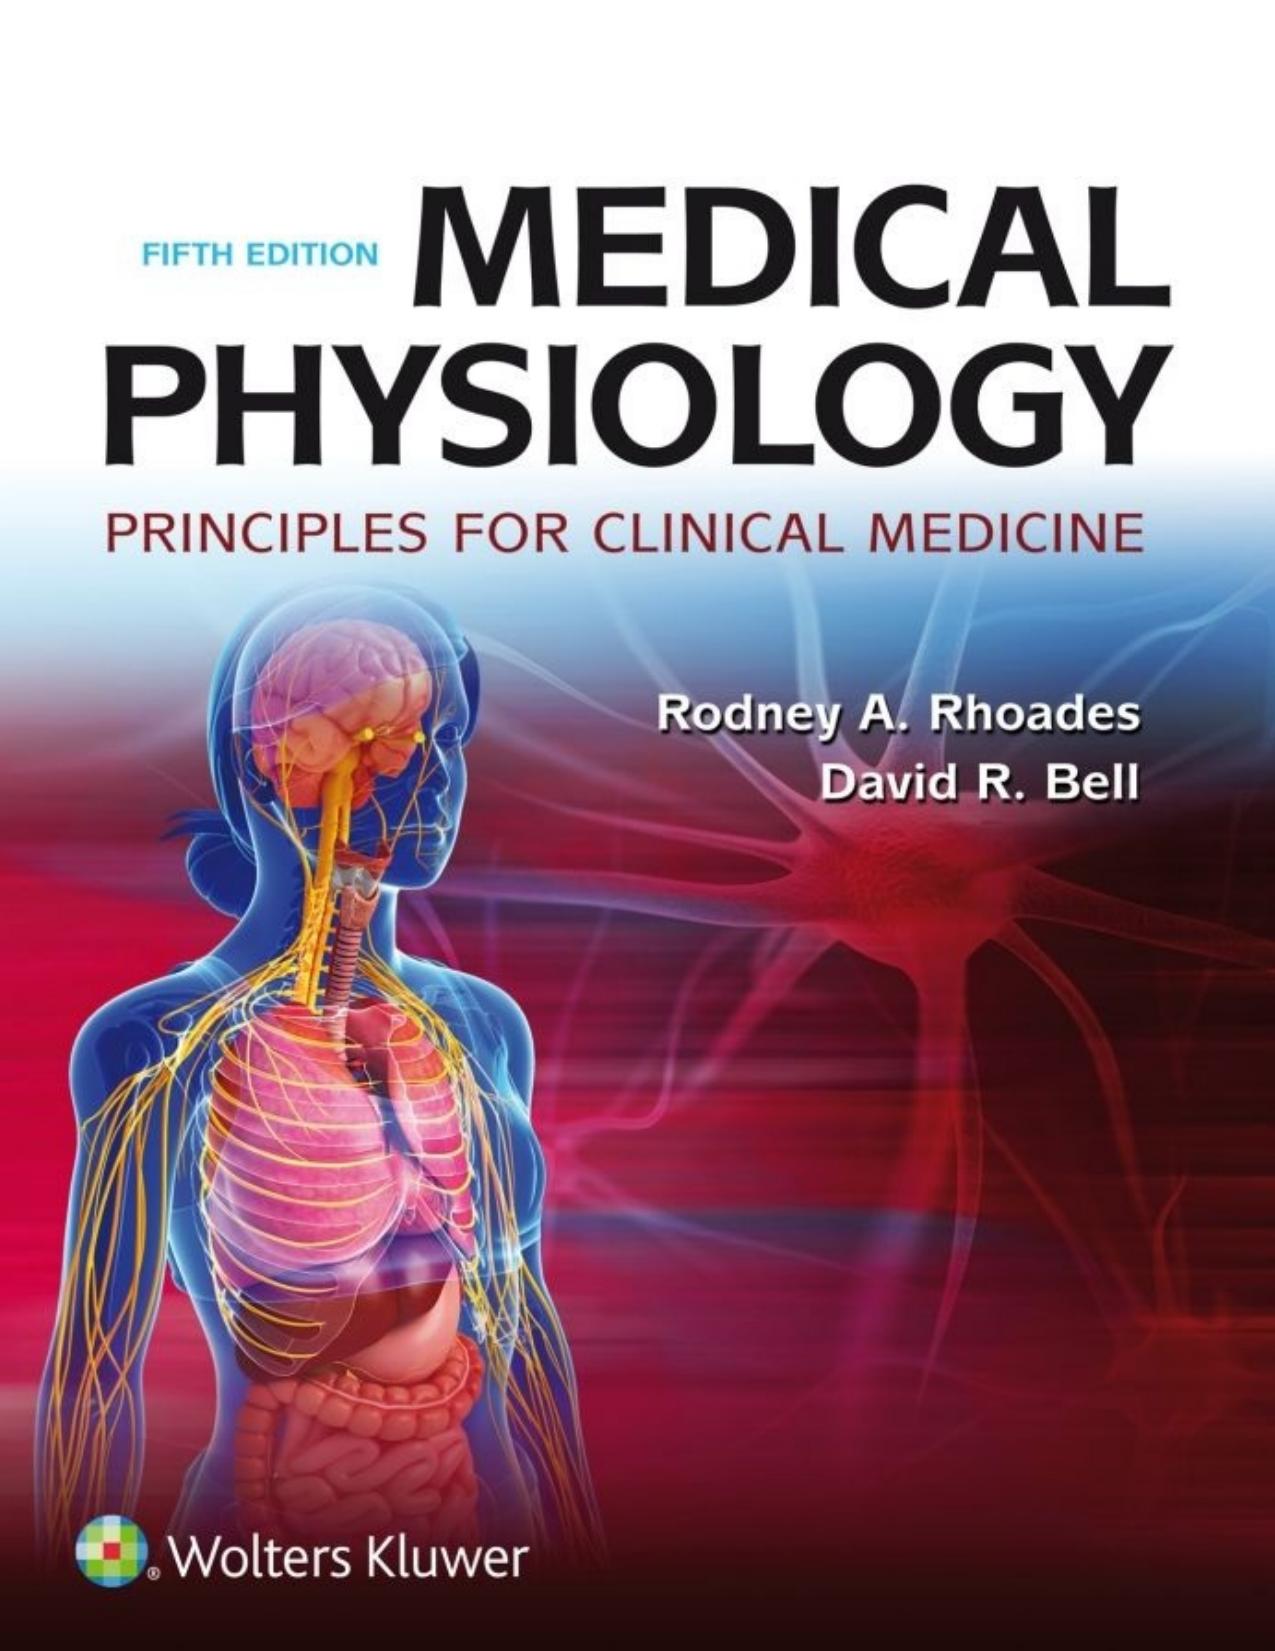 Medical Physiology Principles for Clinical Medicine 2017